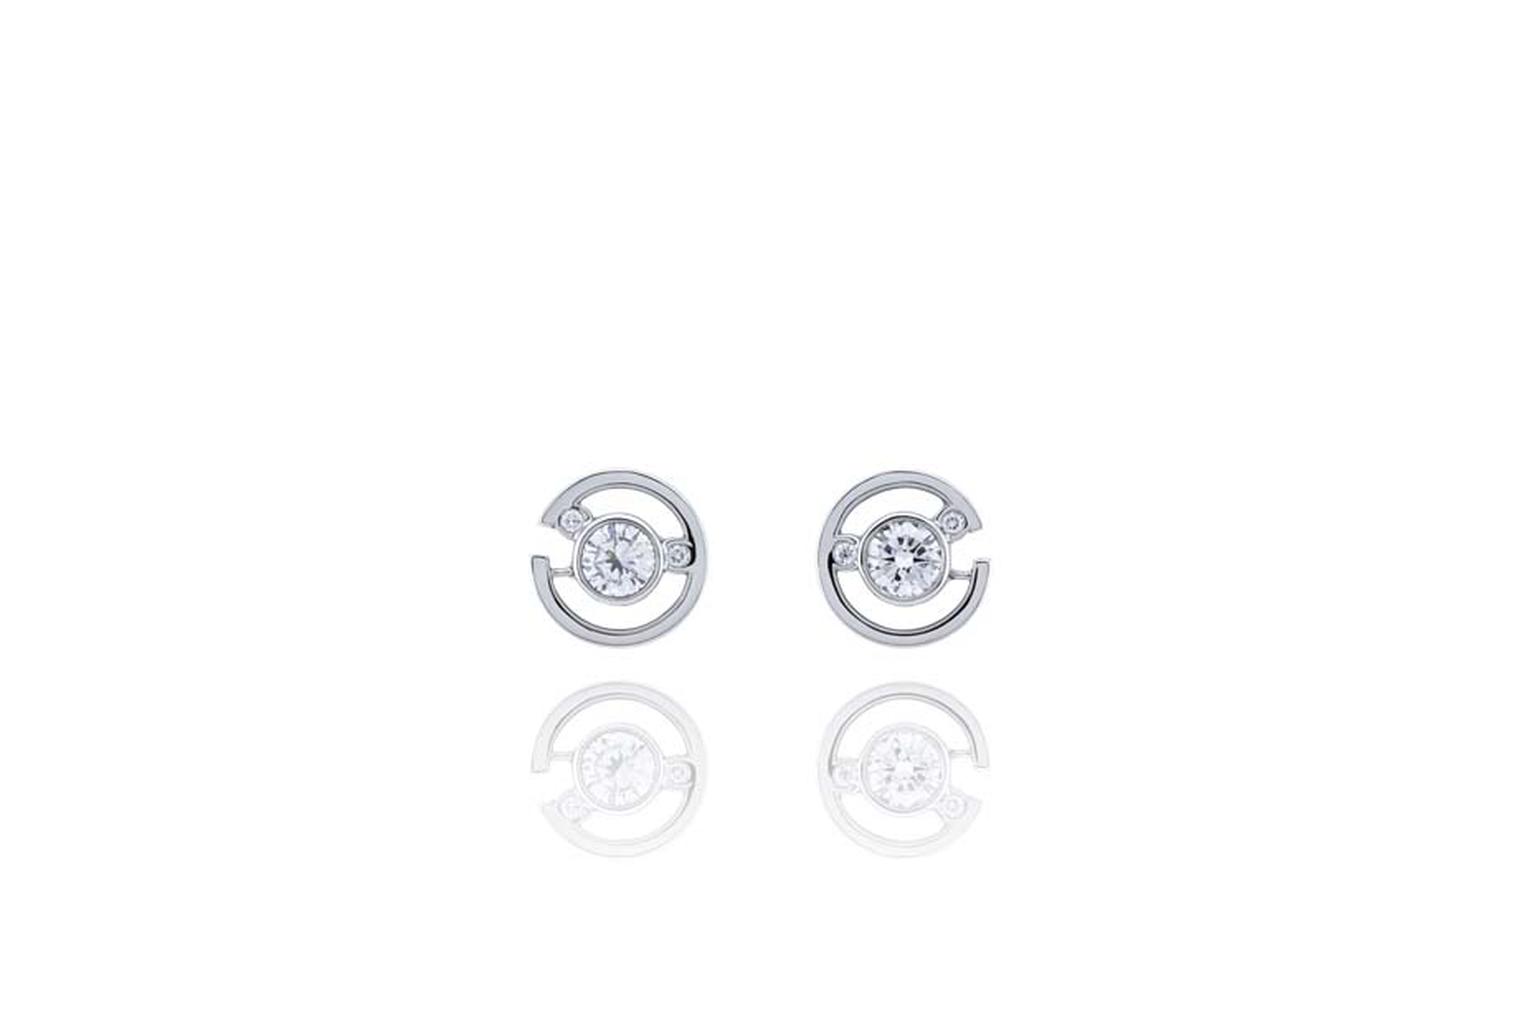 Boodles Maze collection diamond stud earrings in white gold.